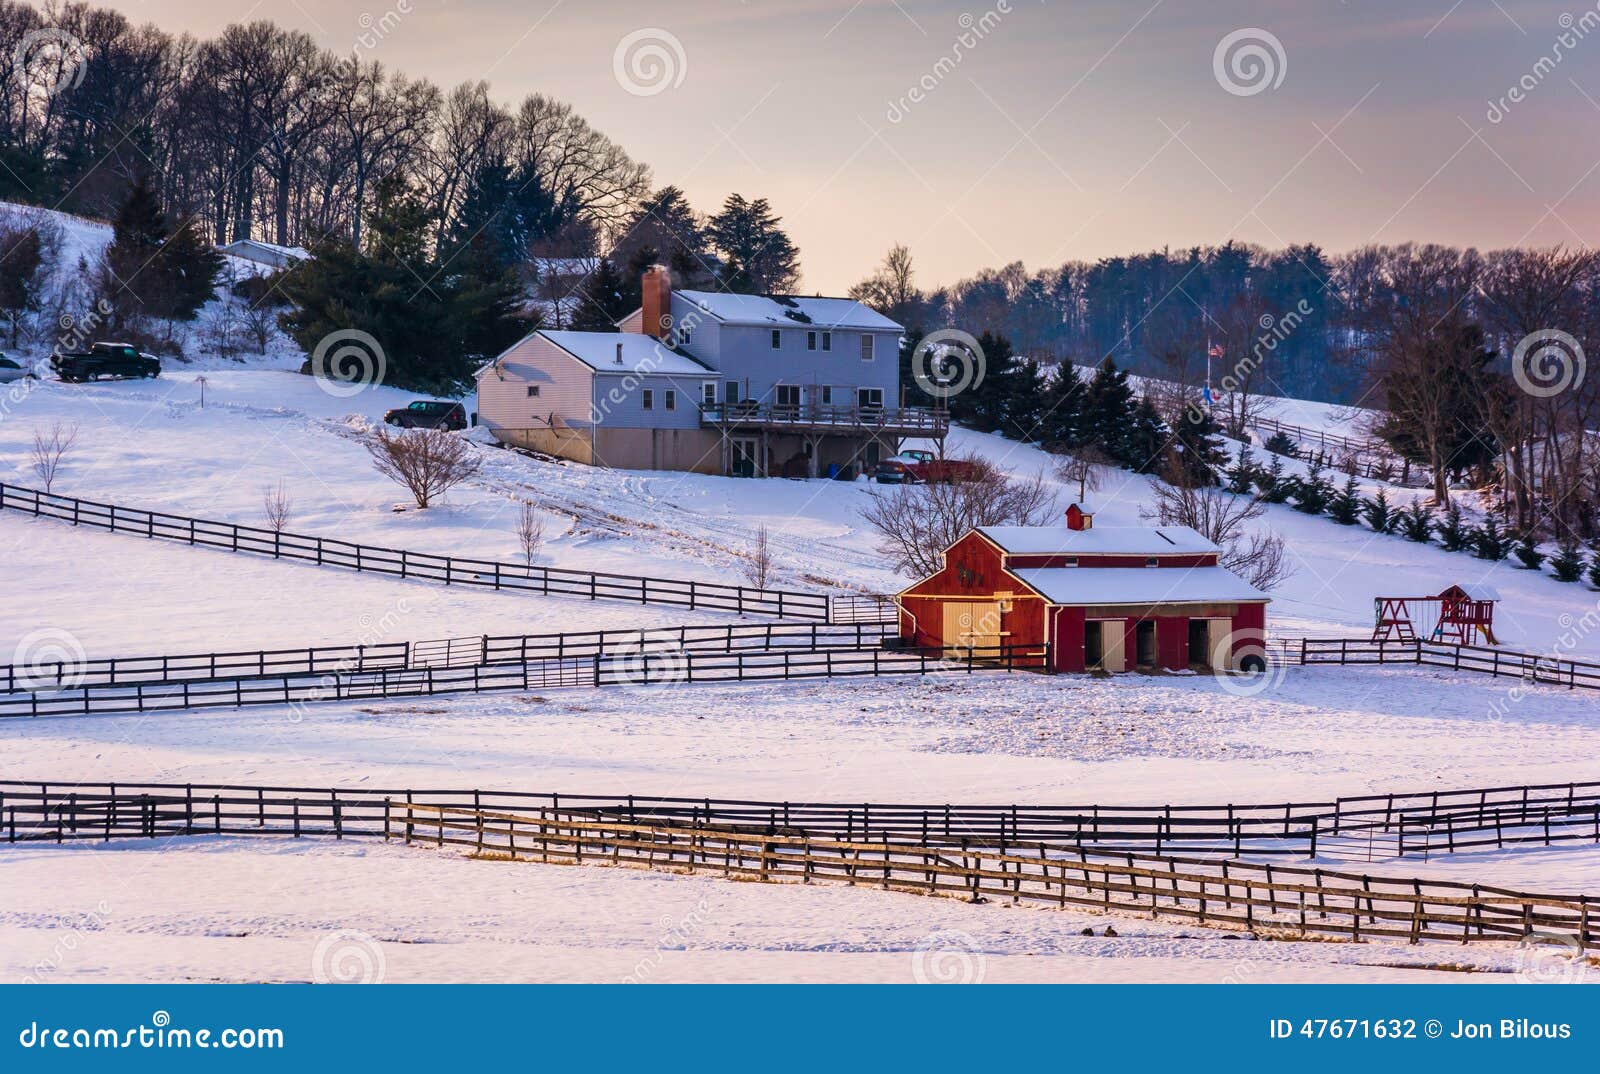 winter view of a house and barn on farm in rural carroll county, maryland.